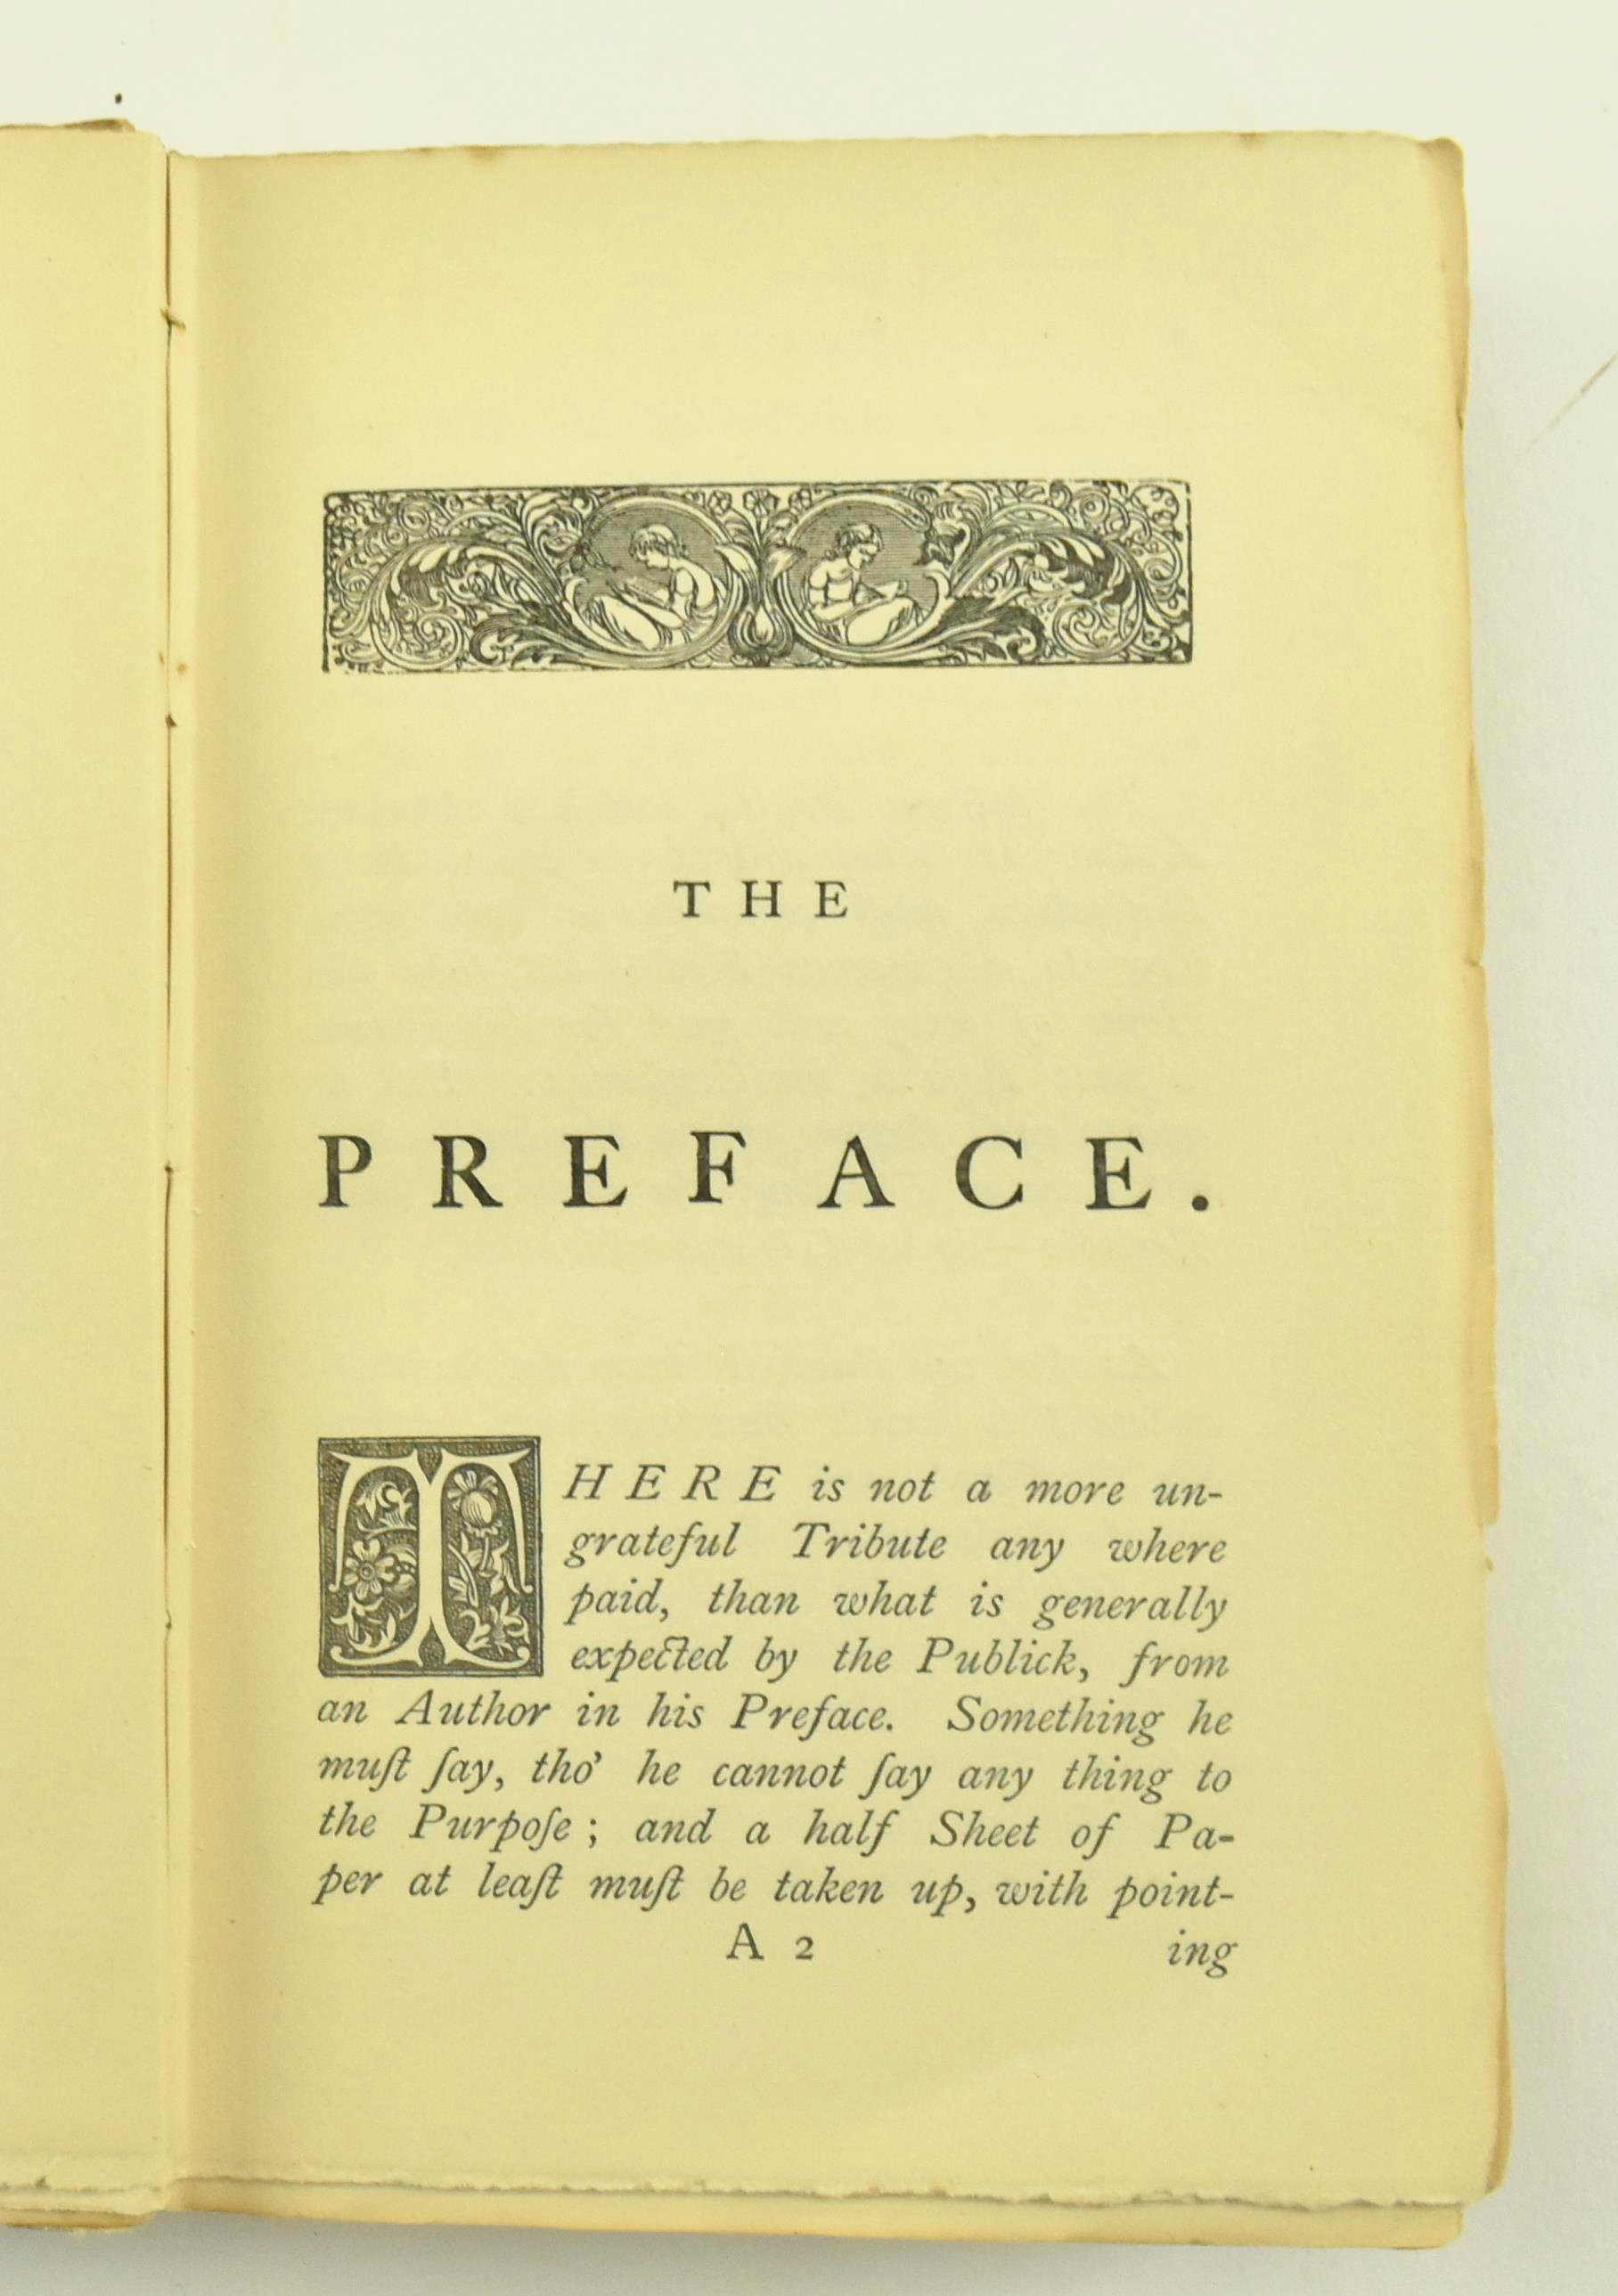 (PHILIPS, AMBROSE) 1728 COLLECTION OF OLD BALLADS - Image 3 of 6